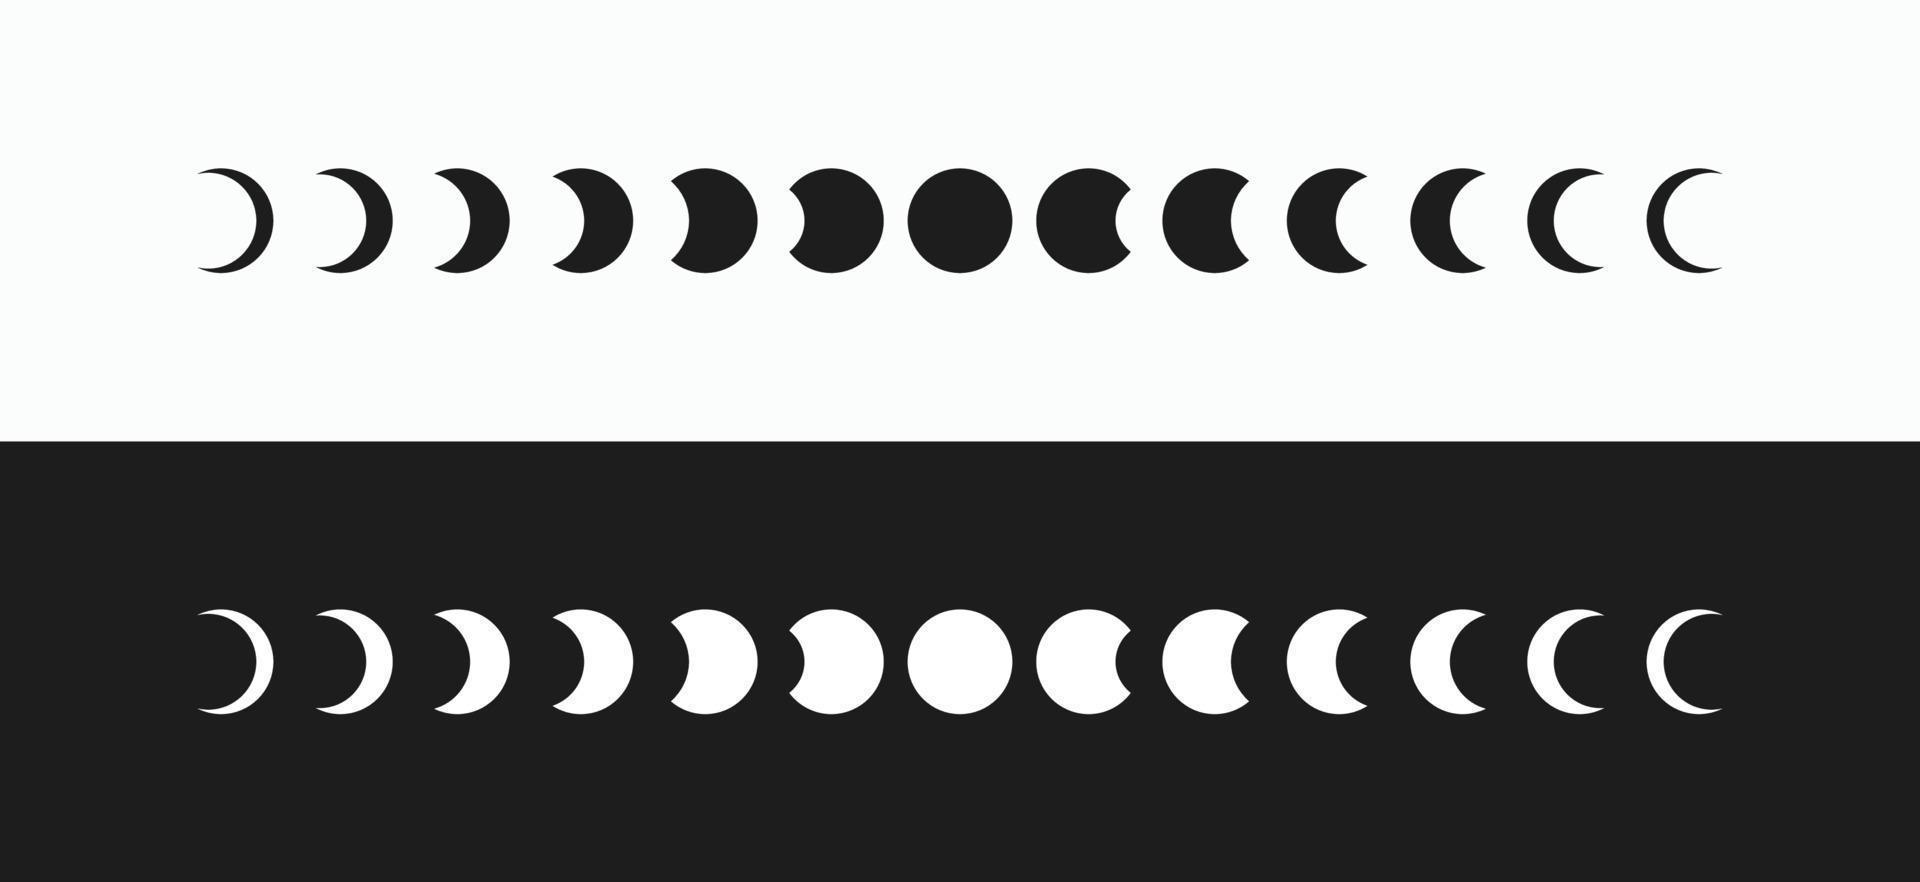 Set of Moon phases icons. Moon phases astronomy icon vector template